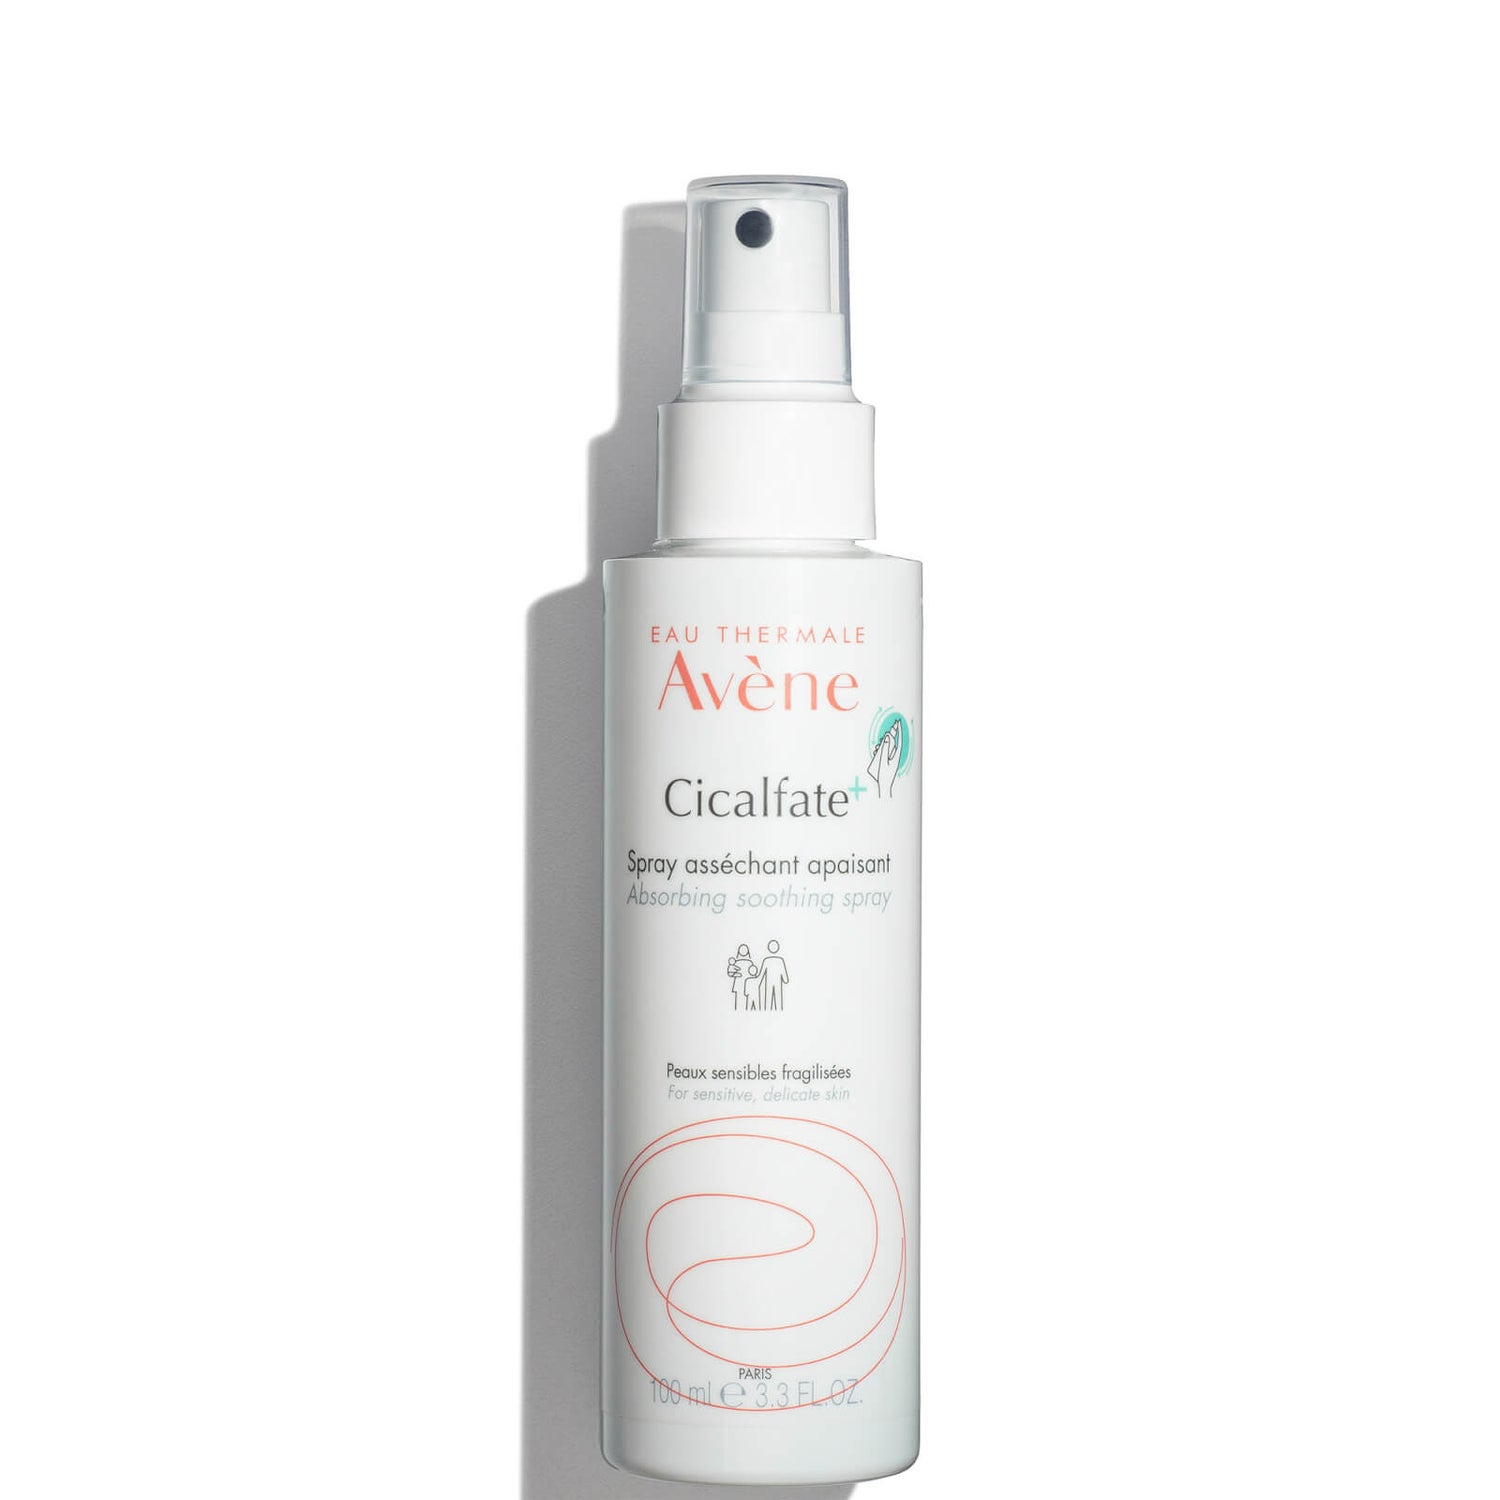 Avène Cicalfate+ Absorbing Soothing Spray 3.3 fl.oz.